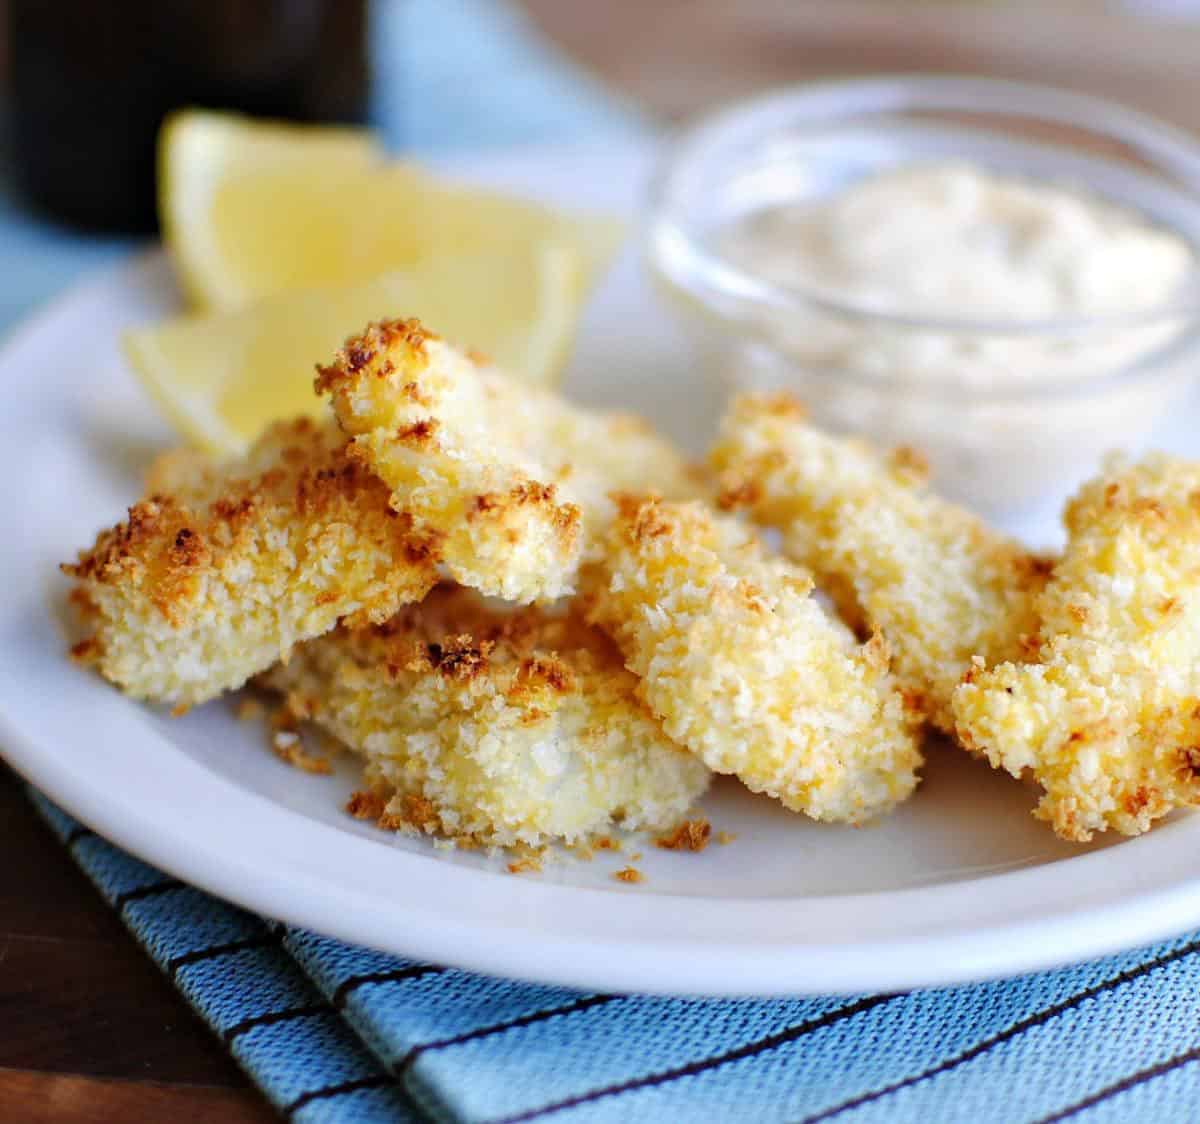  Perfectly bite-sized, these fish bites are ideal for any party spread.